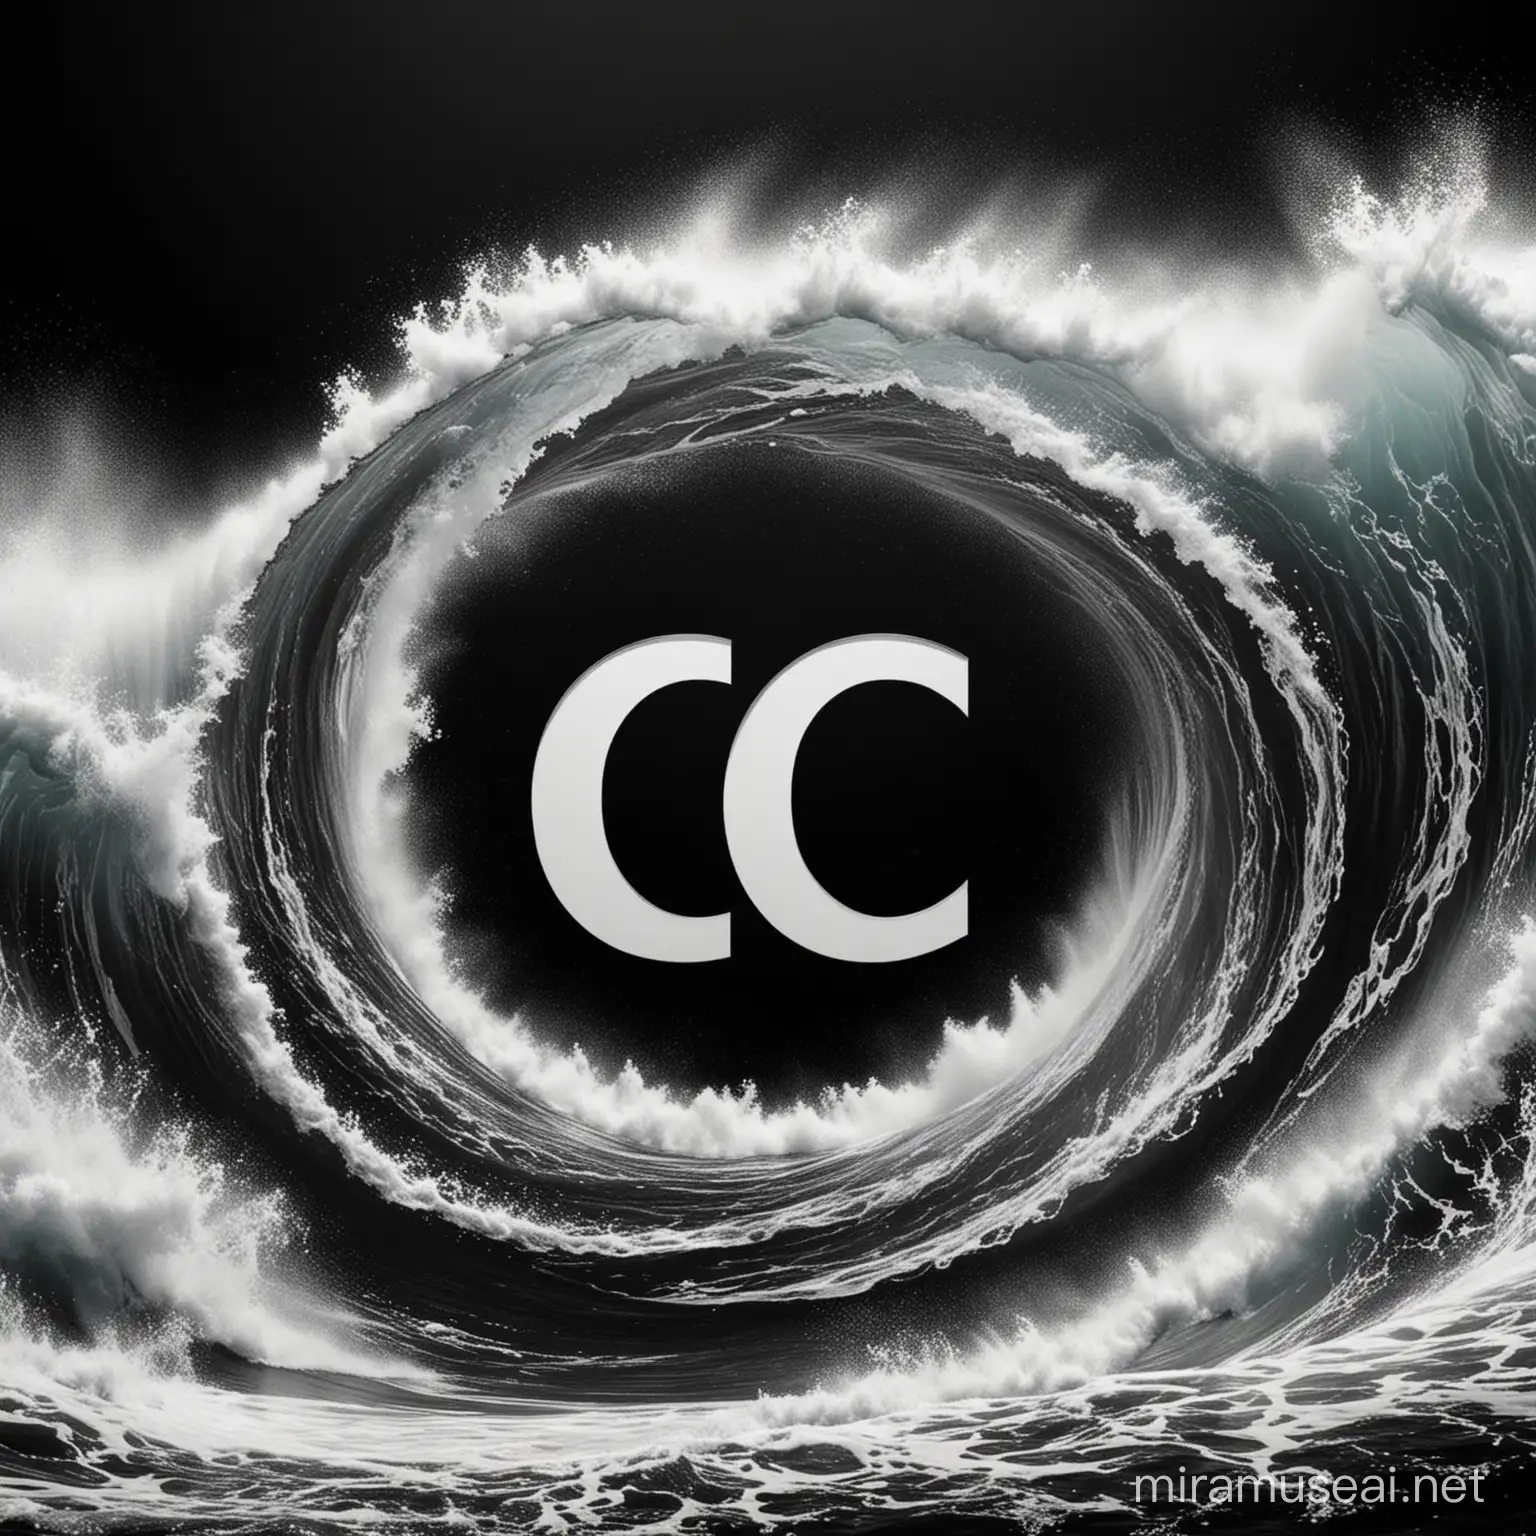 make a logo about a black background and a white text with two times the letter c and make it be surrounded by white waves